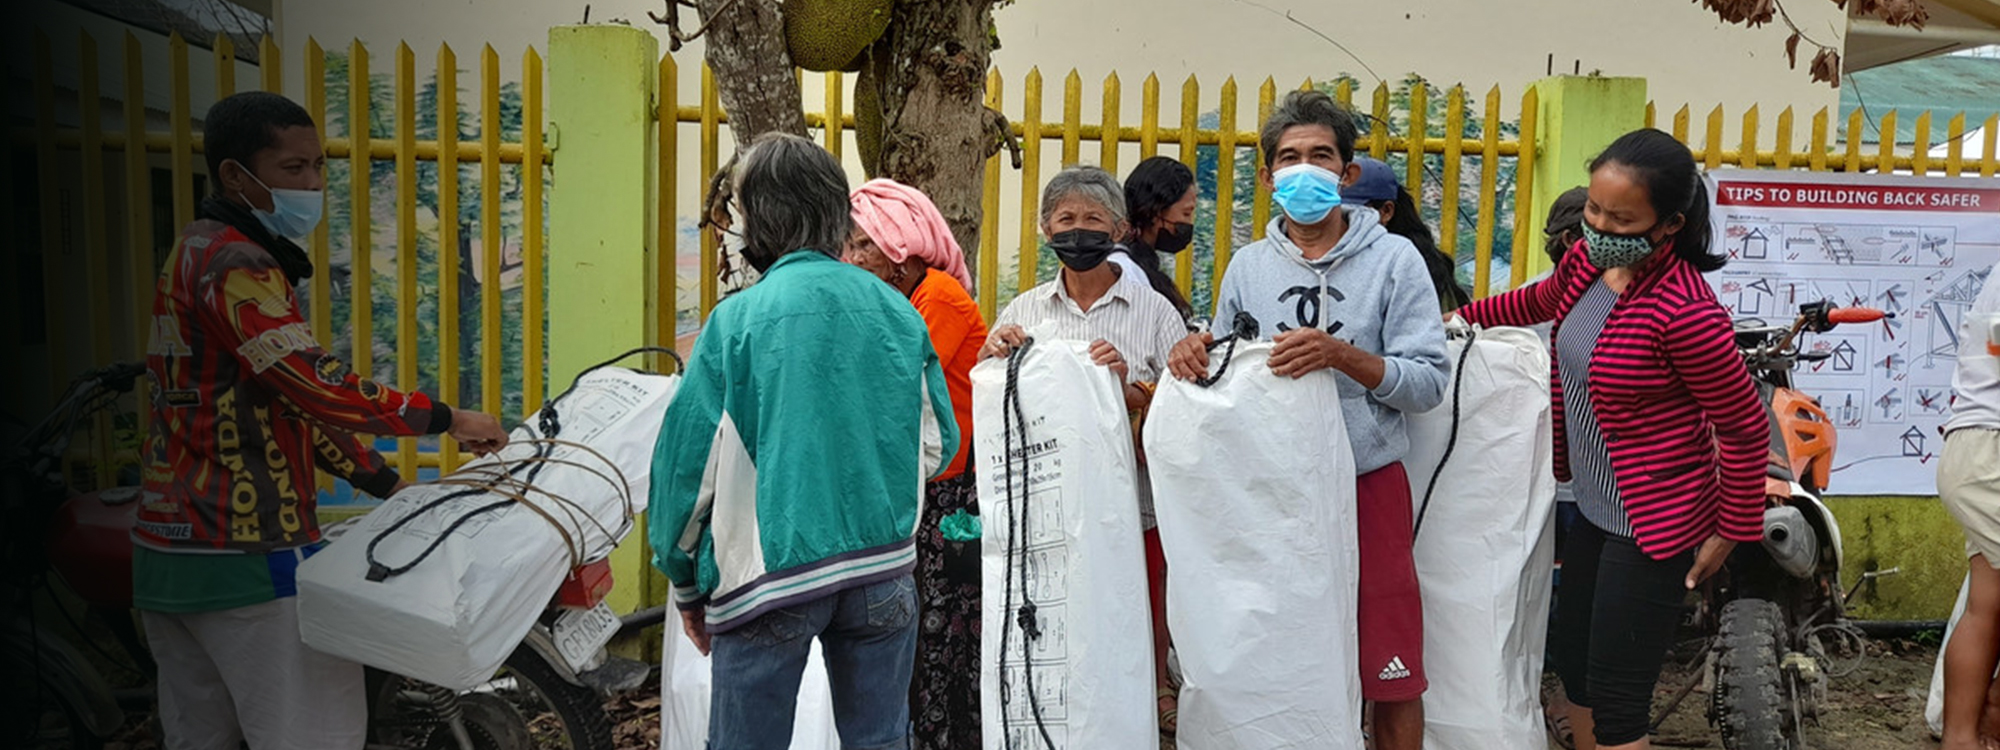 People wearing masks and receiving shelter kits